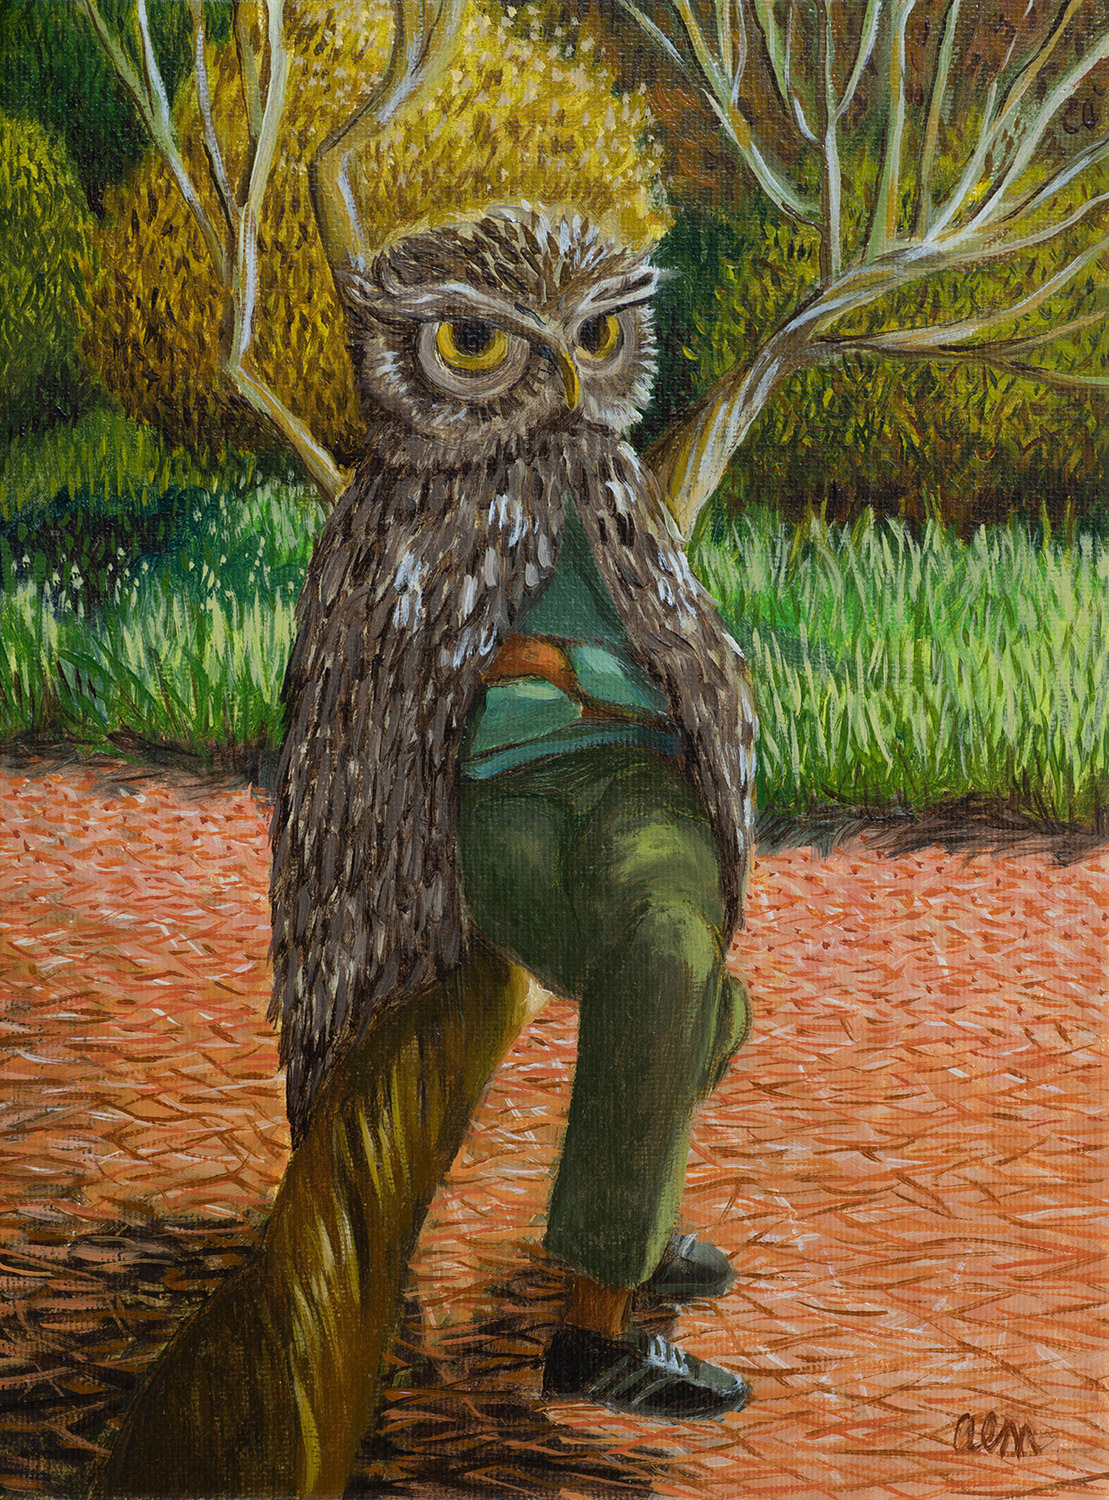 Oil painting by Ann McCay of a person in a Owl costume in a wood, 32 x 38cm framed size